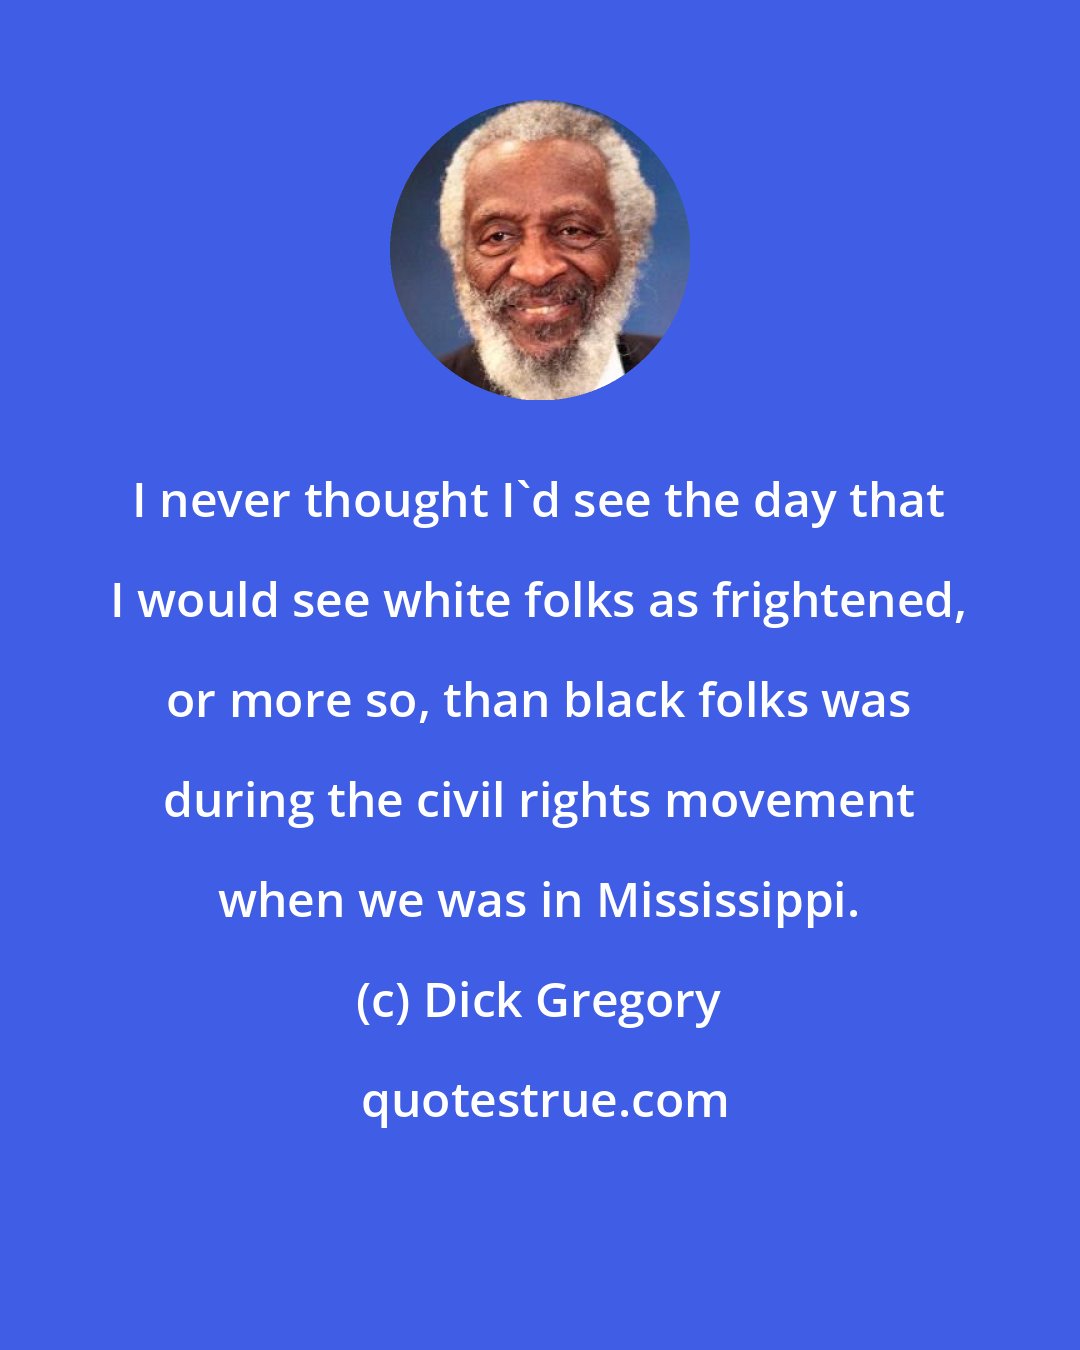 Dick Gregory: I never thought I'd see the day that I would see white folks as frightened, or more so, than black folks was during the civil rights movement when we was in Mississippi.